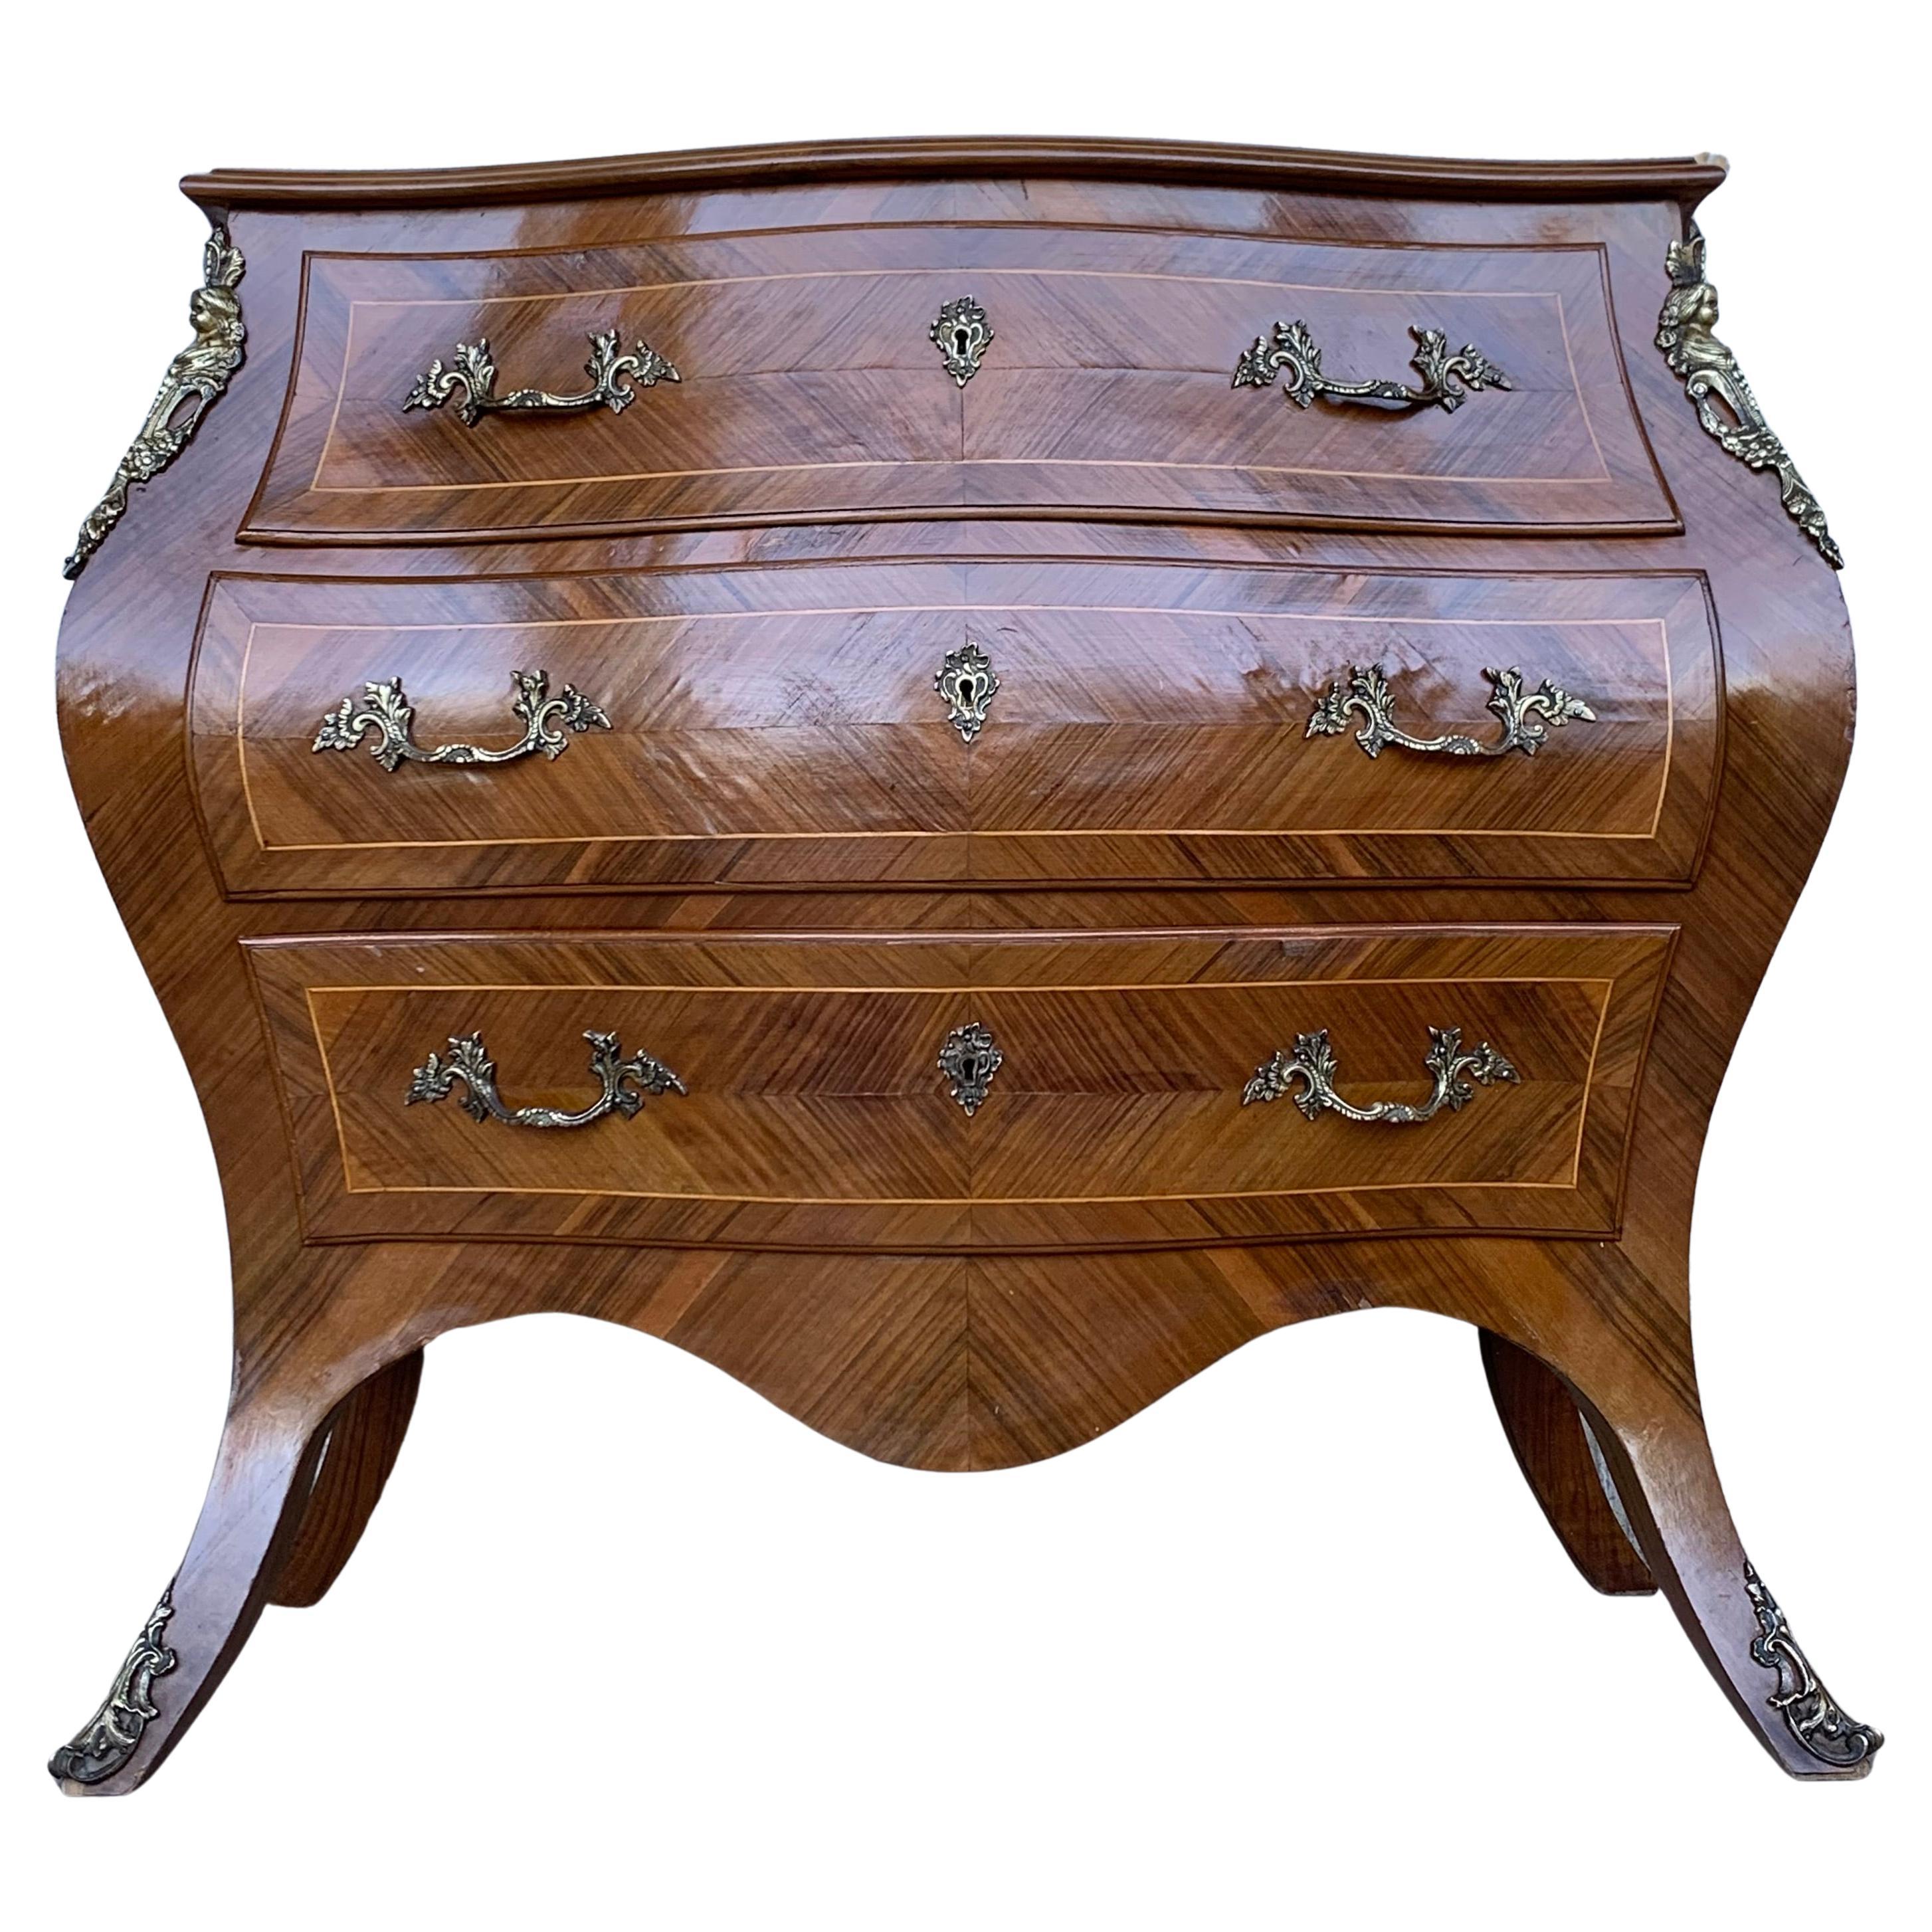 French Louis XV style kingwood veneer commode, the shaped marble top above a bombe case with ormolu bronze mounts, highly decorated throughout with marquetry inlay with three drawers, on short cabriole legs.


